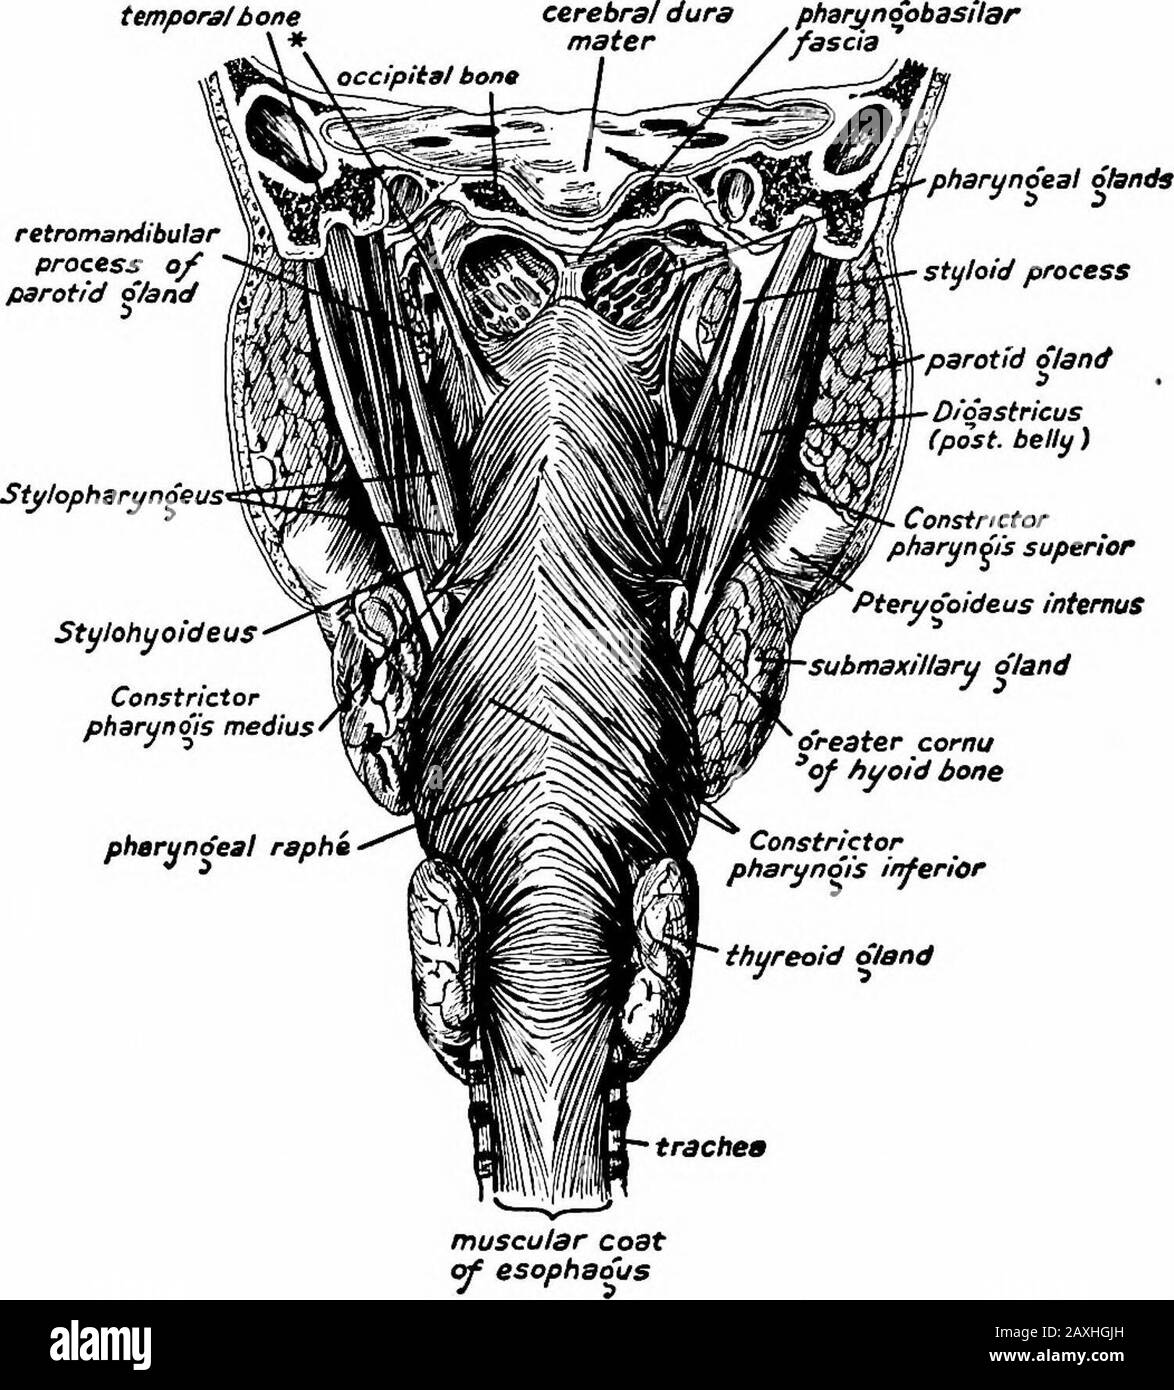 A manual of anatomy . aryngopalatinus arises from the soft palate and isinserted into the dorsal margin of the thyreoid cartilage near thern. stylopharyngeus. Action.—Draws the pharynx over the bolus of food in deglutition. Nerve Supply.—Accessory through the pharyngeal plexus. The m. salpingopharyngeus is a small muscle that arises from theinferior part of the auditory (Eustachian) tube and blends with them. pharyngopalatinus. The m. levator veli palatini arises from the inferior part of thecartilaginous auditory tube and from the apex of the petrous portion 158 MYOLOGY of the temporal bone. Stock Photo